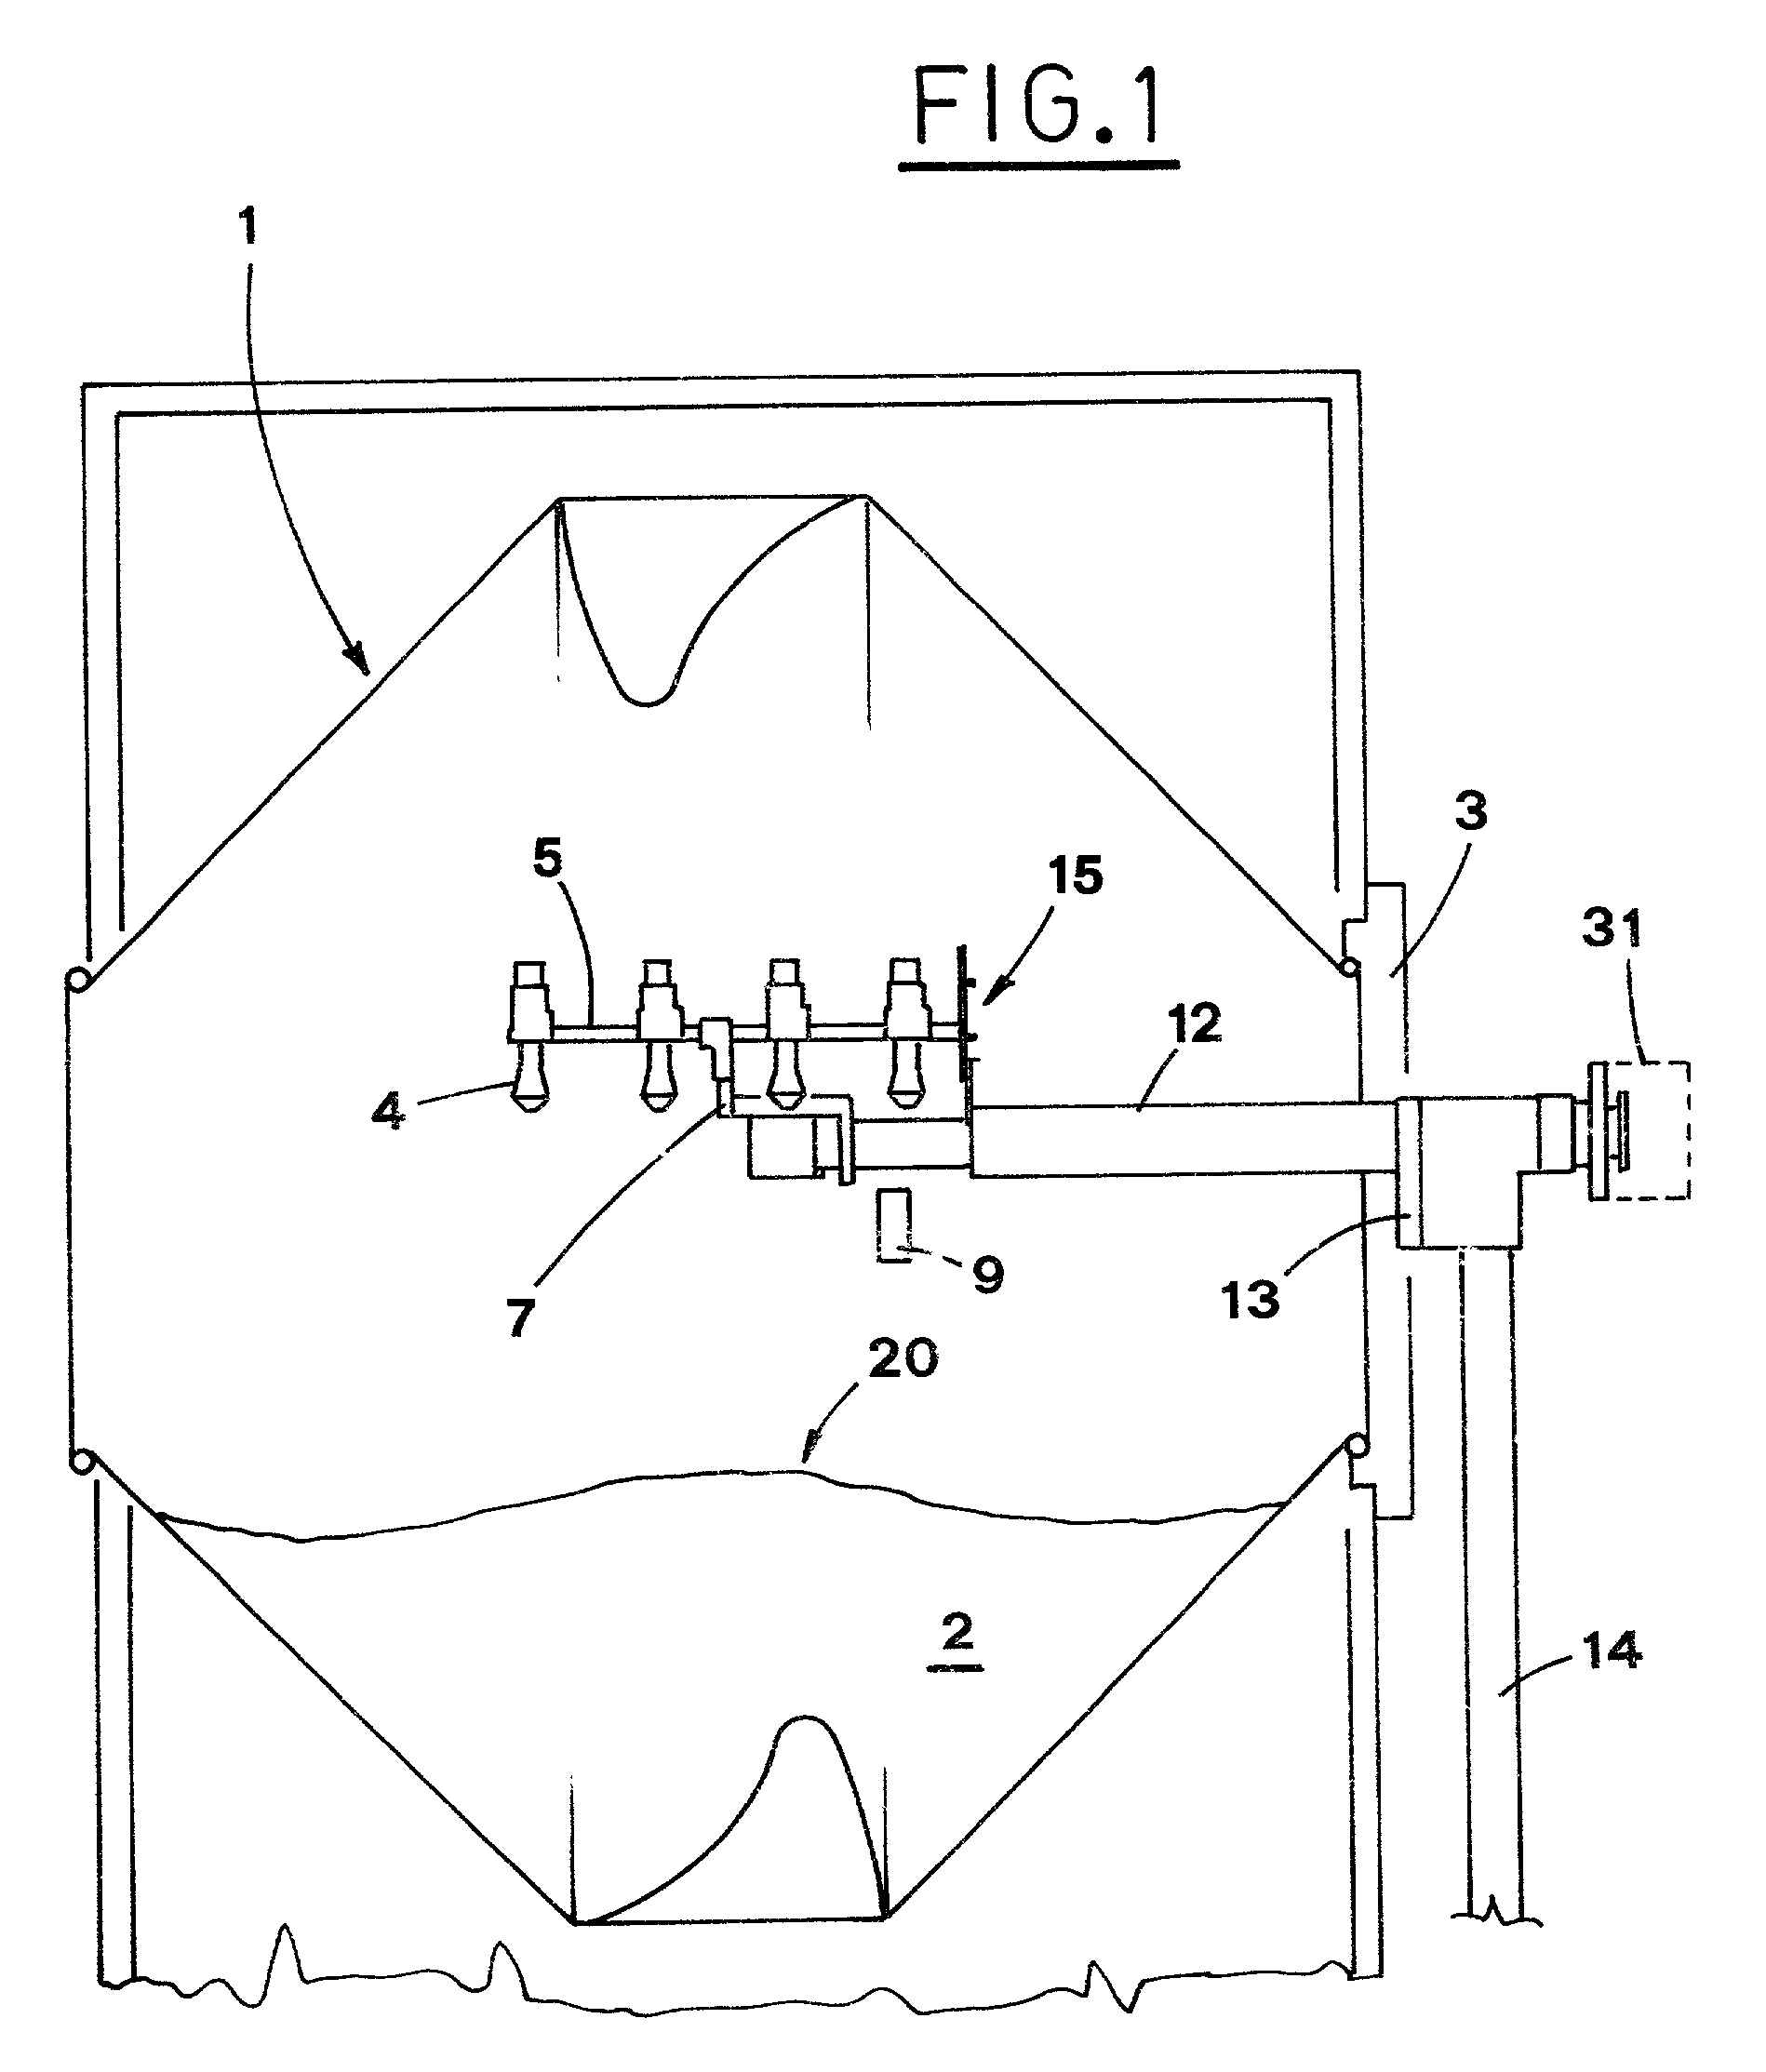 Device for moving and orienting spraying nozzles in a coating pan